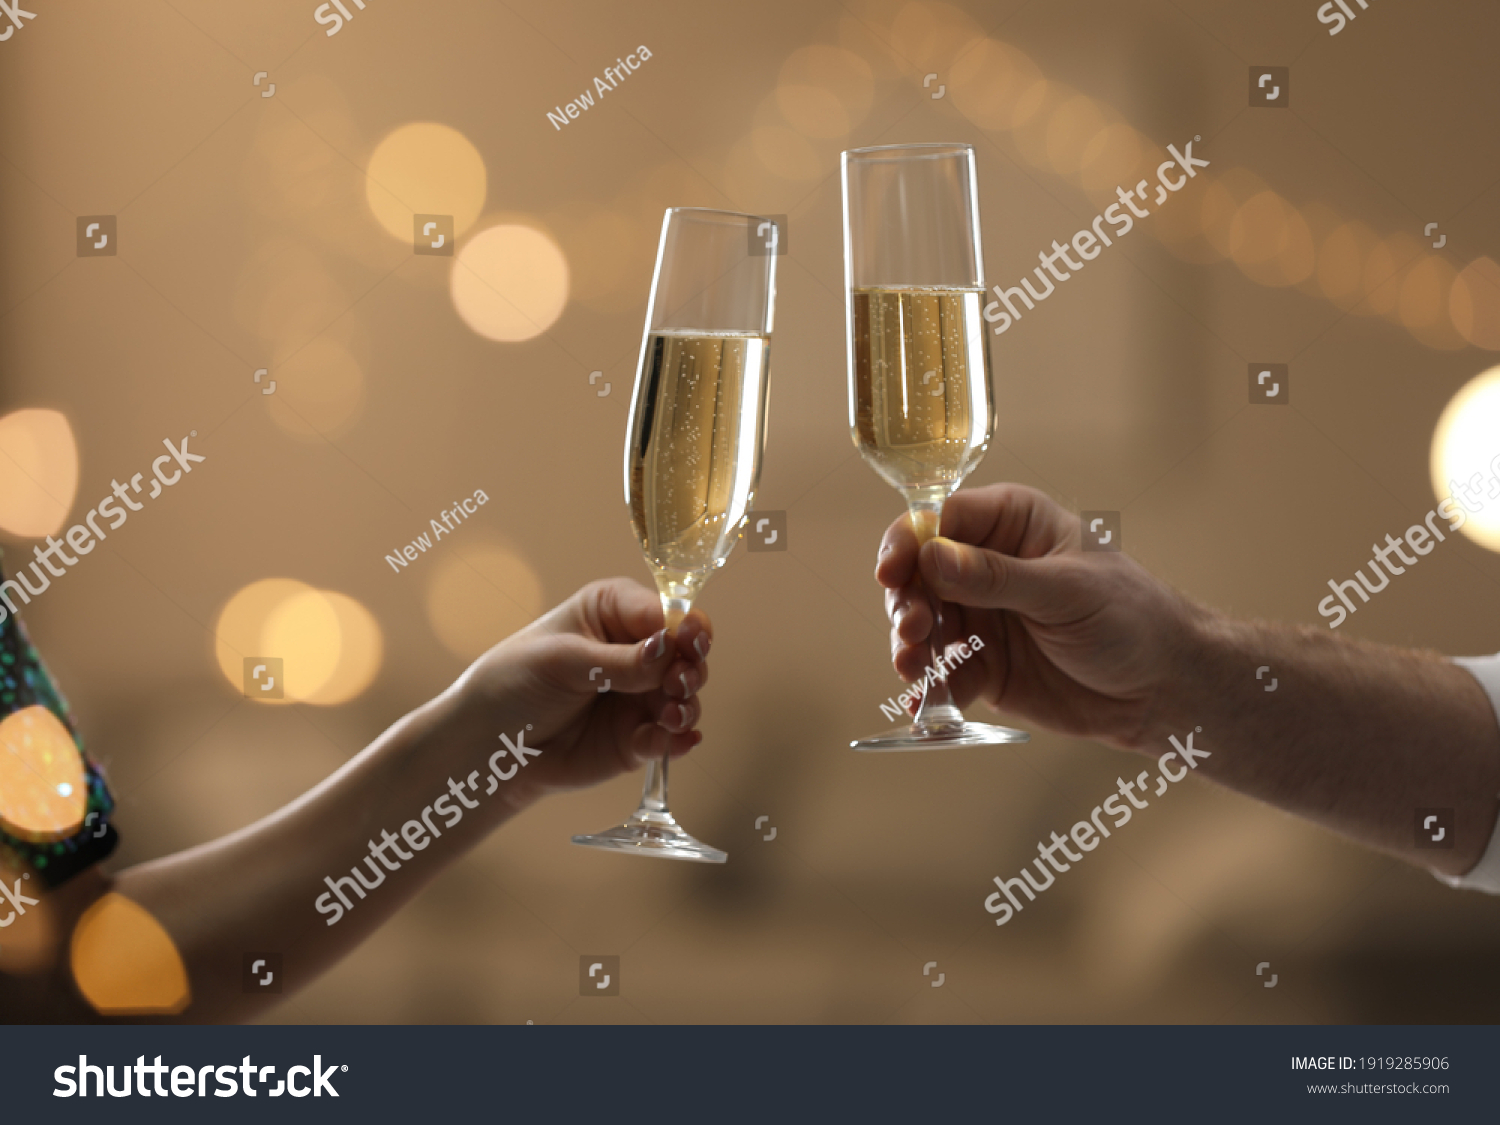 People clinking glasses of champagne against blurred background, closeup. Bokeh effect #1919285906